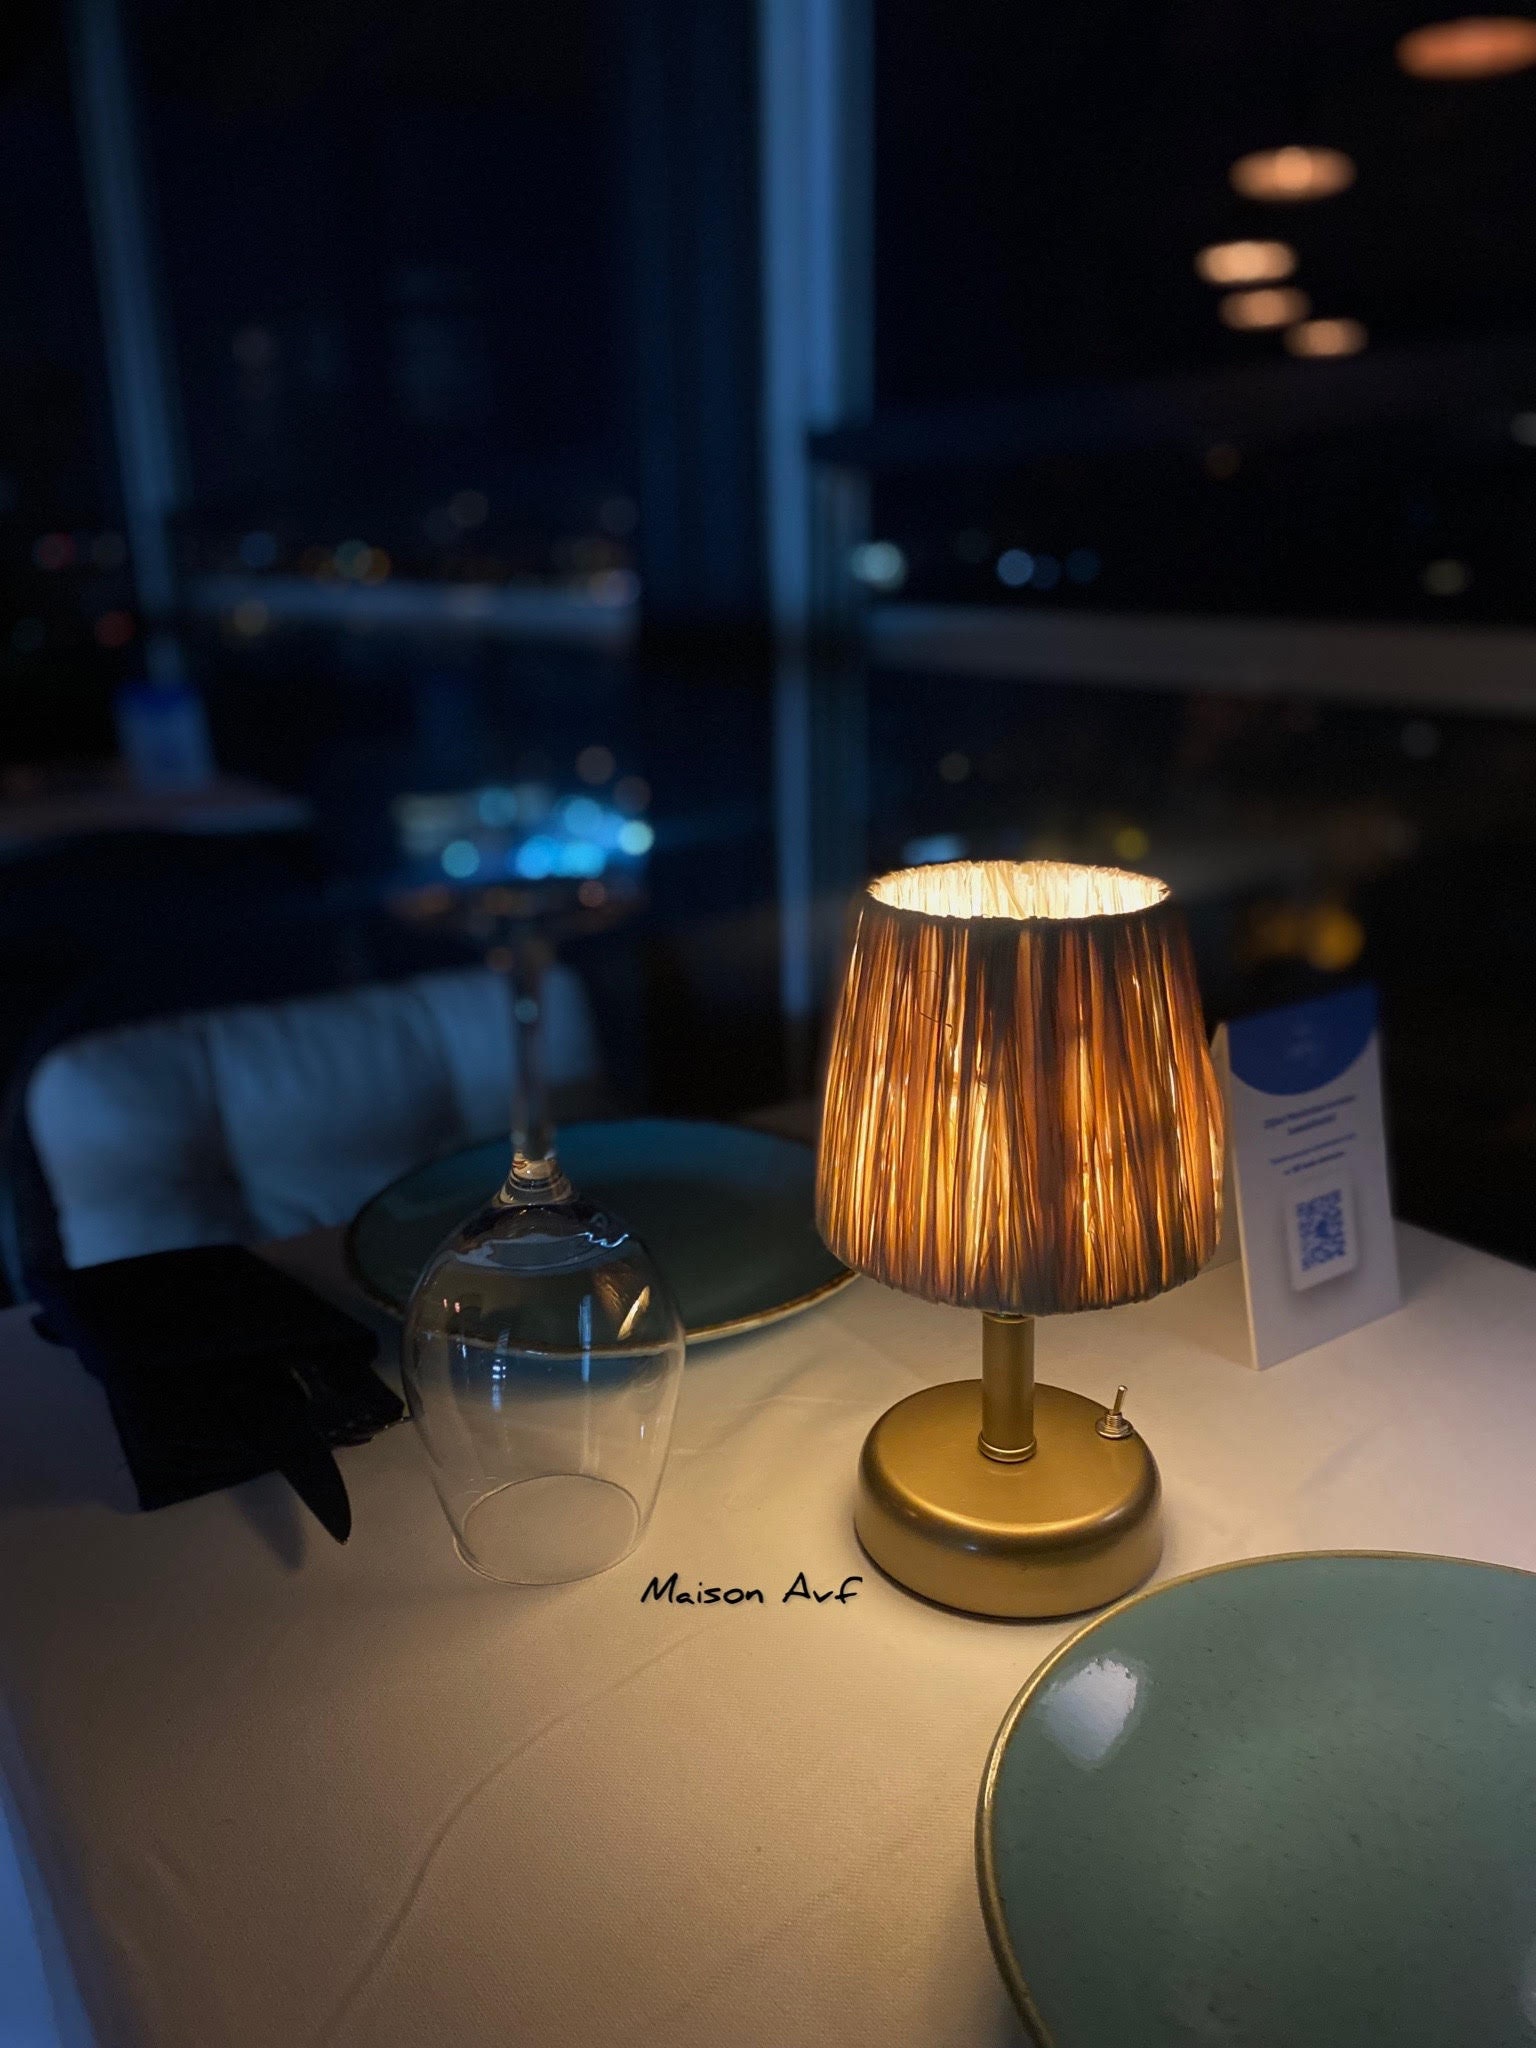 Restaurant Table Lamps, Glass Table Lights